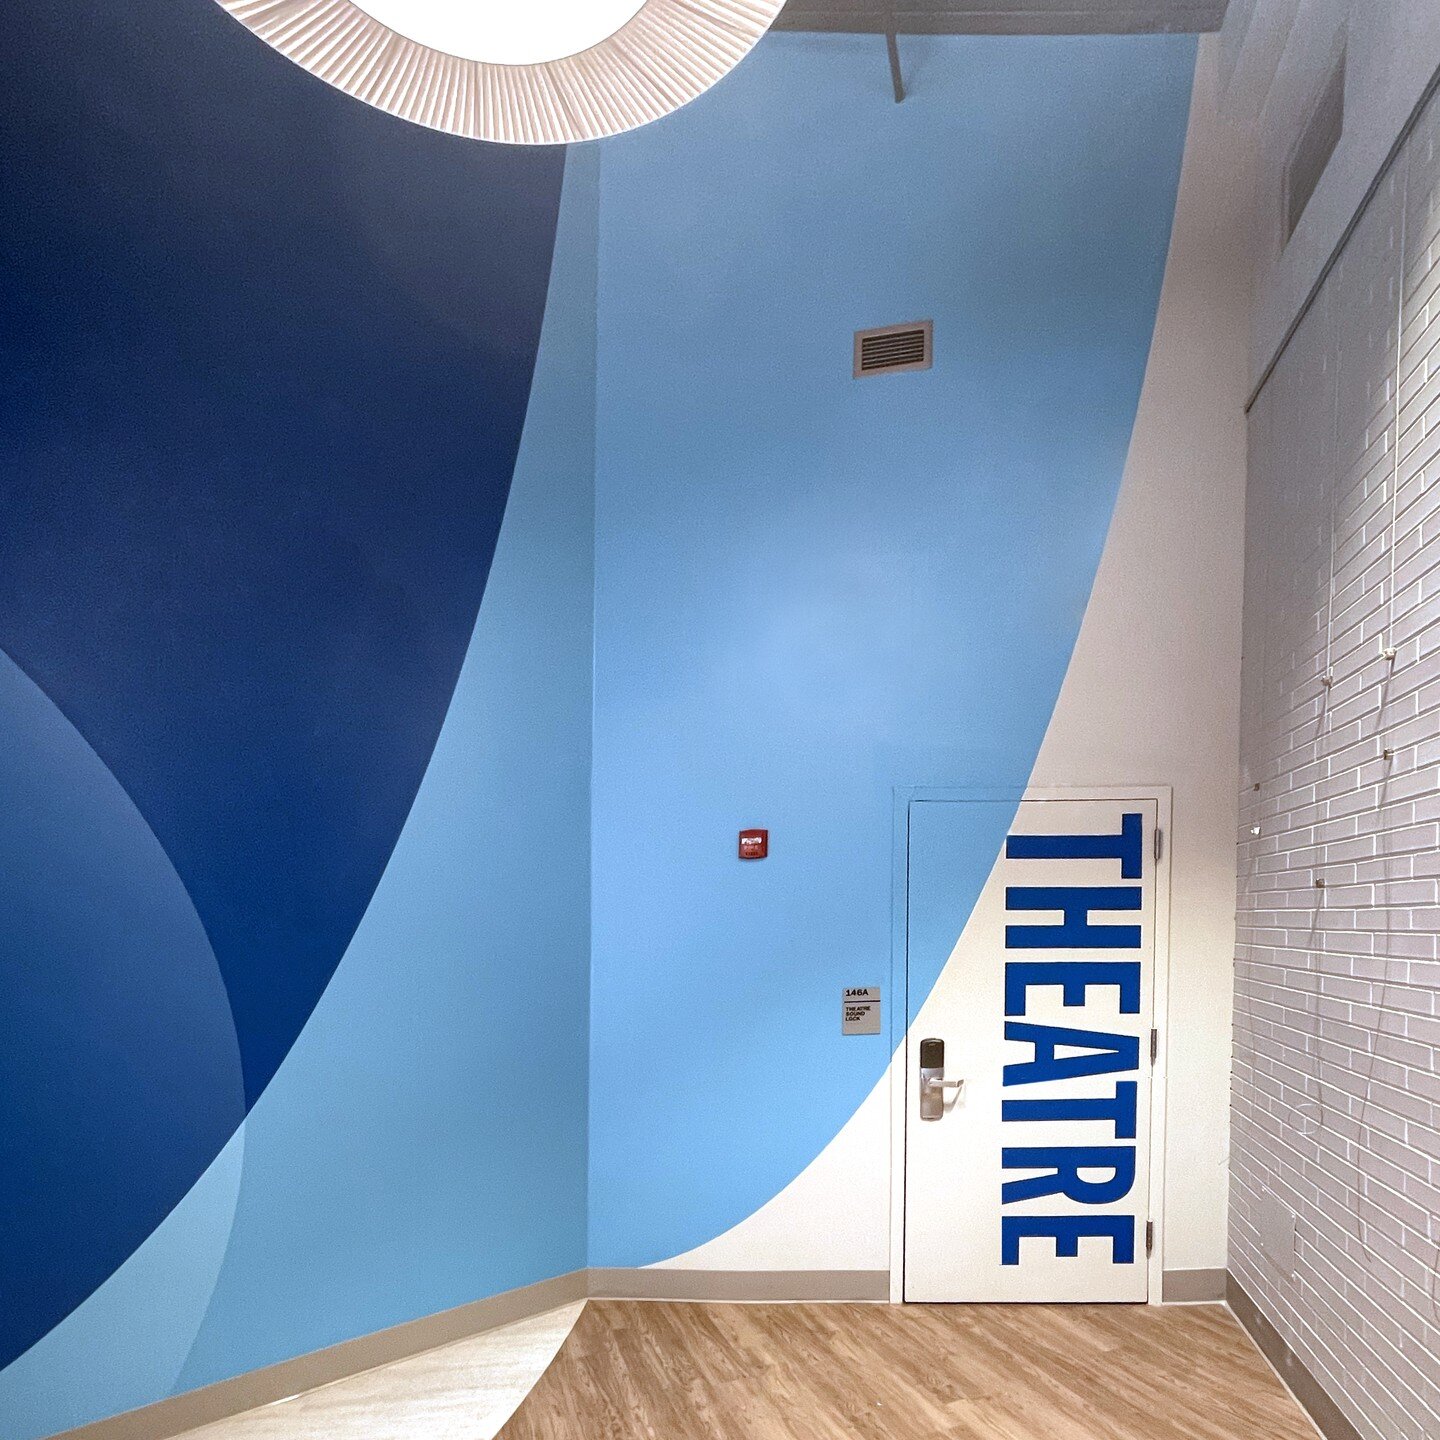 The Bishop Dougherty University Center at Seton Hall University has some new murals by TGO. The wavy checkered pattern is from a university flag and represents the rivers of New Jersey. #muraldesign #universitygraphicsystems #architecturalgraphicdesi